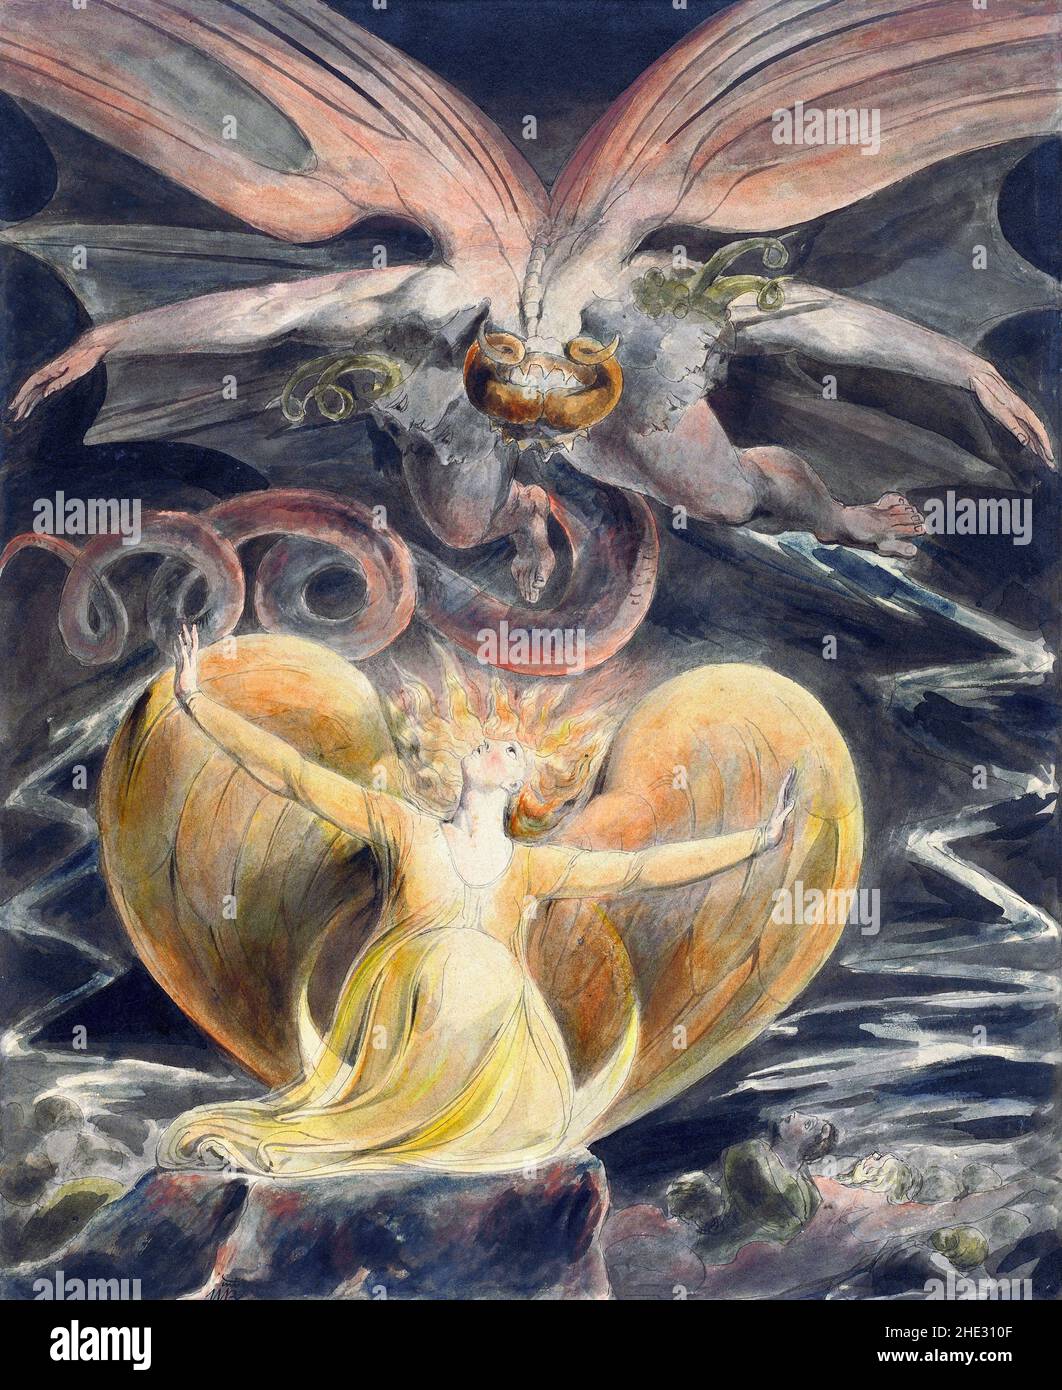 The Great Red Dragon and the Woman Clothed with the Sun by William Blake, pen and ink with watercolor over graphite, c. 1805 Stock Photo